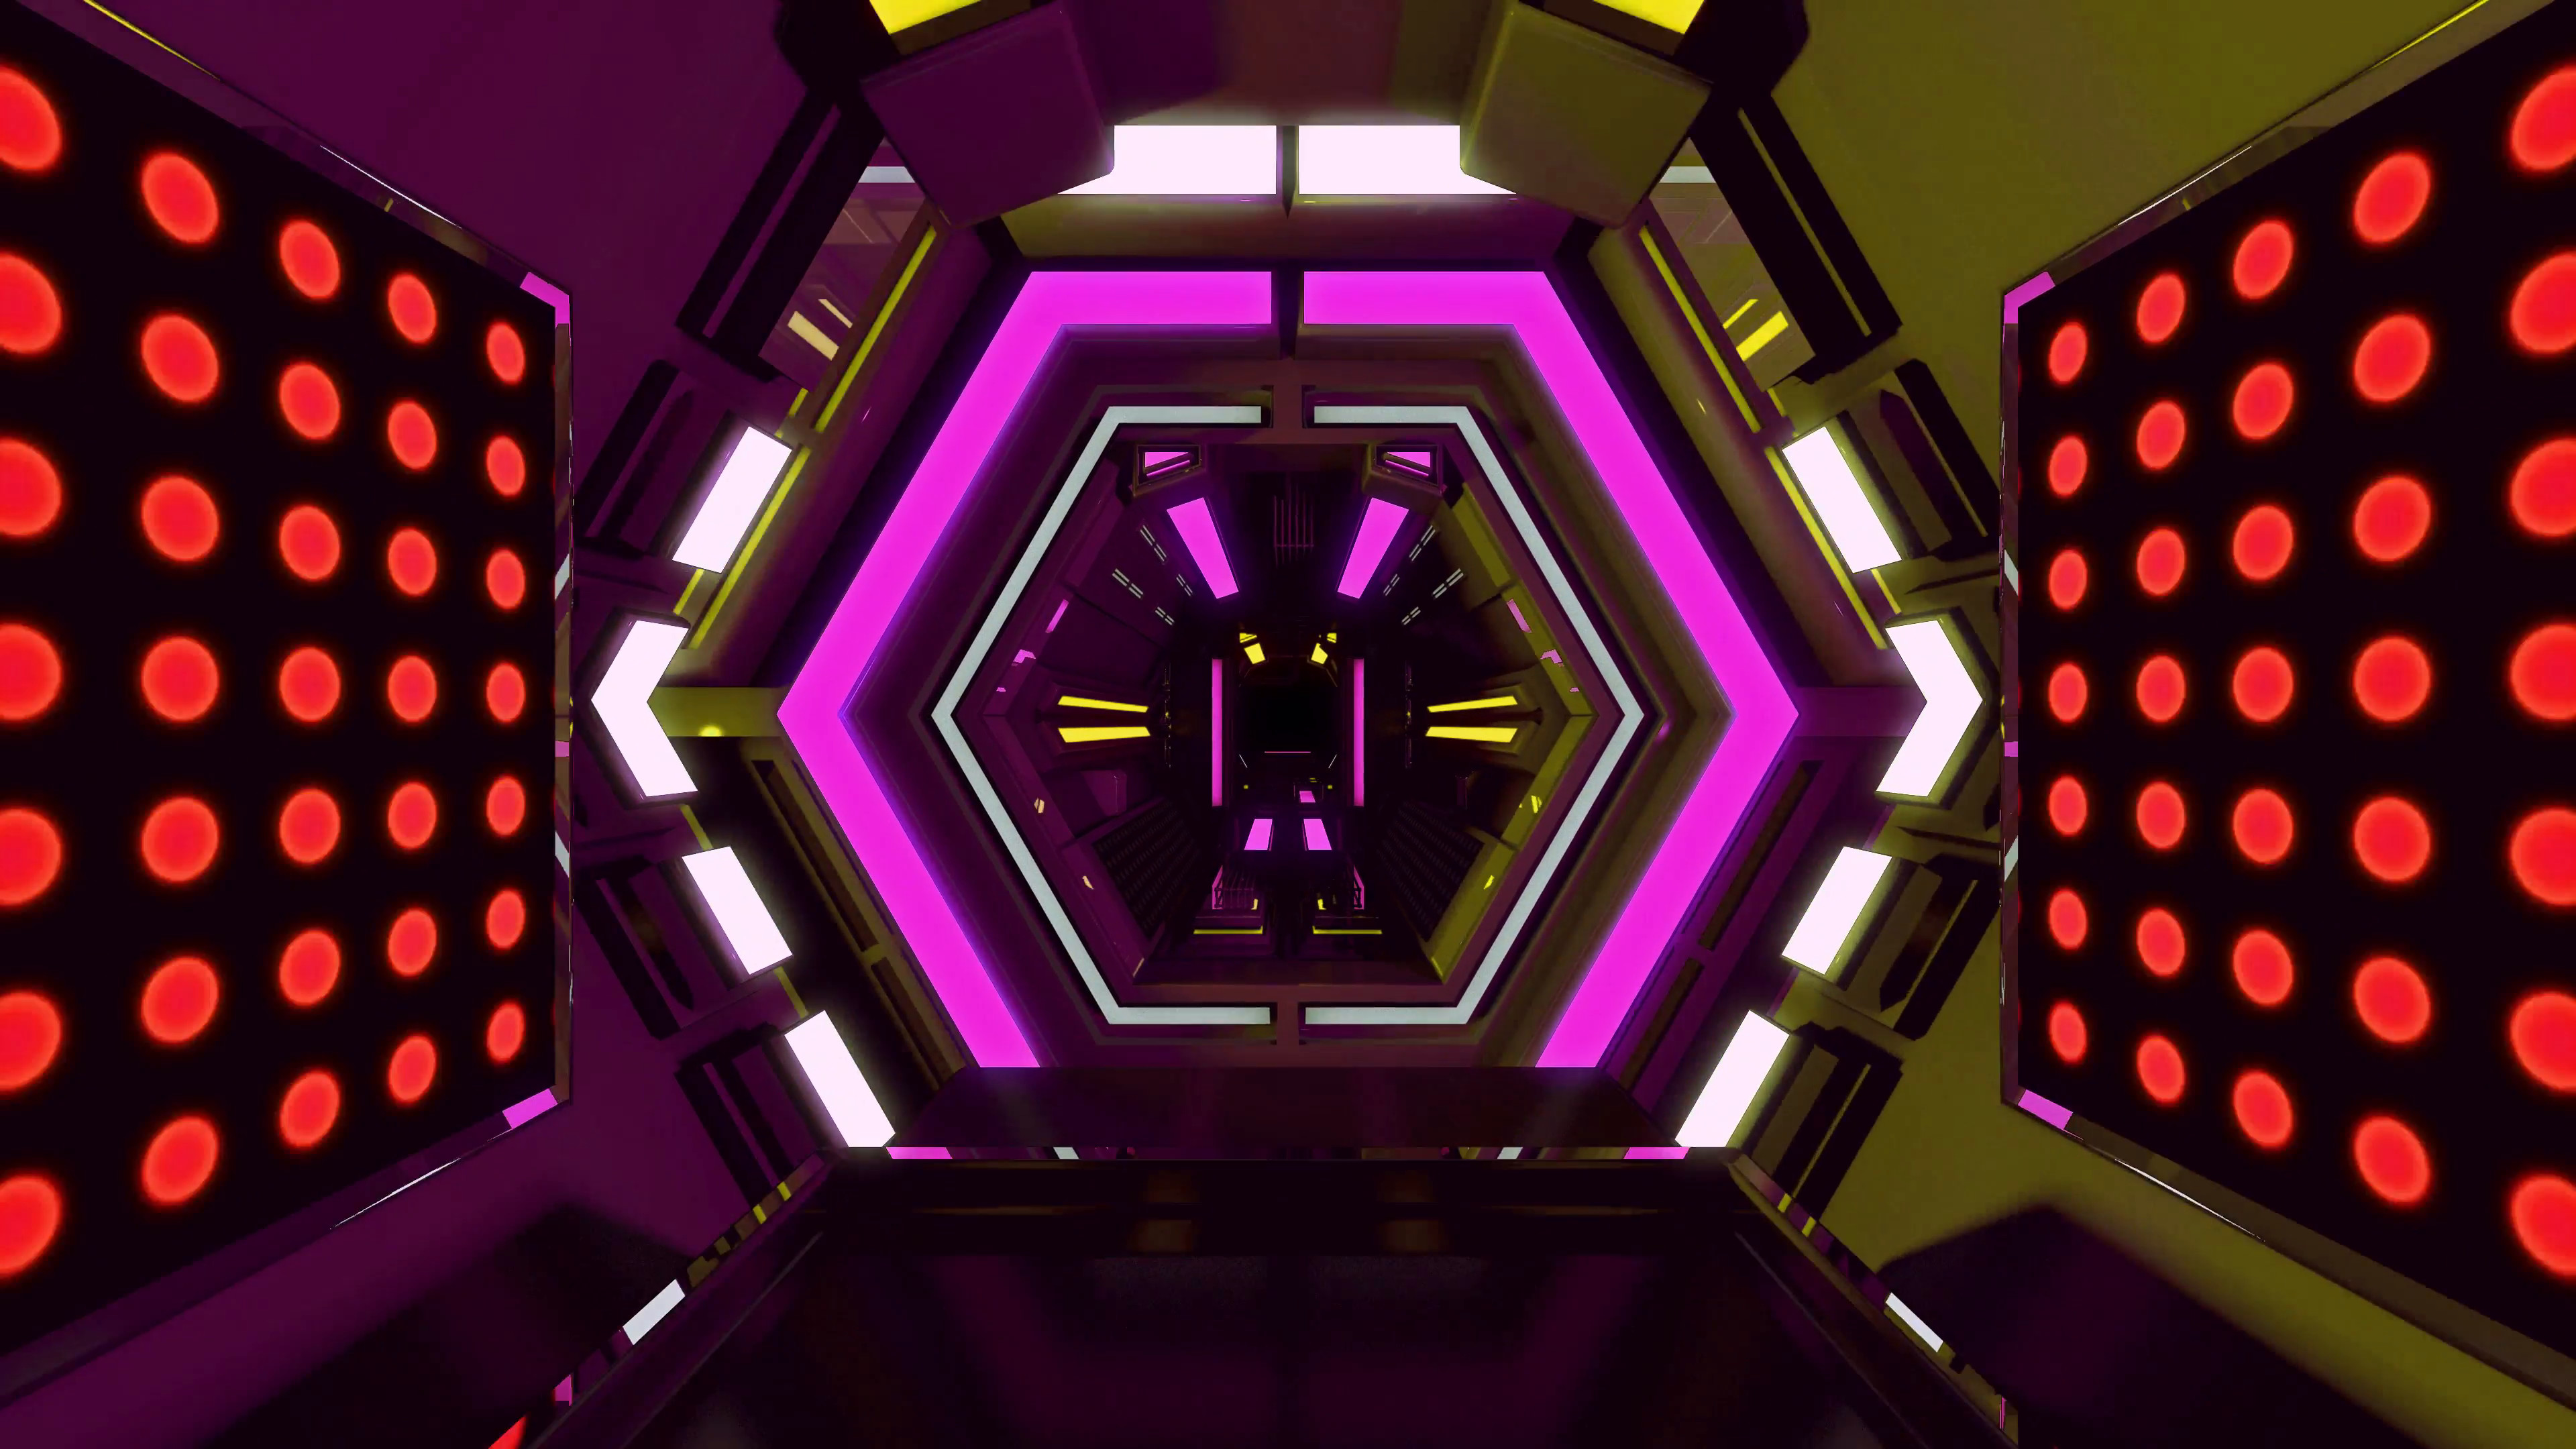 3840x2160 Seamless 3d Animation of sweet pink spaceship or robotic tunnel with  futuristic technology design with zooming camera movement used for  background pattern ...